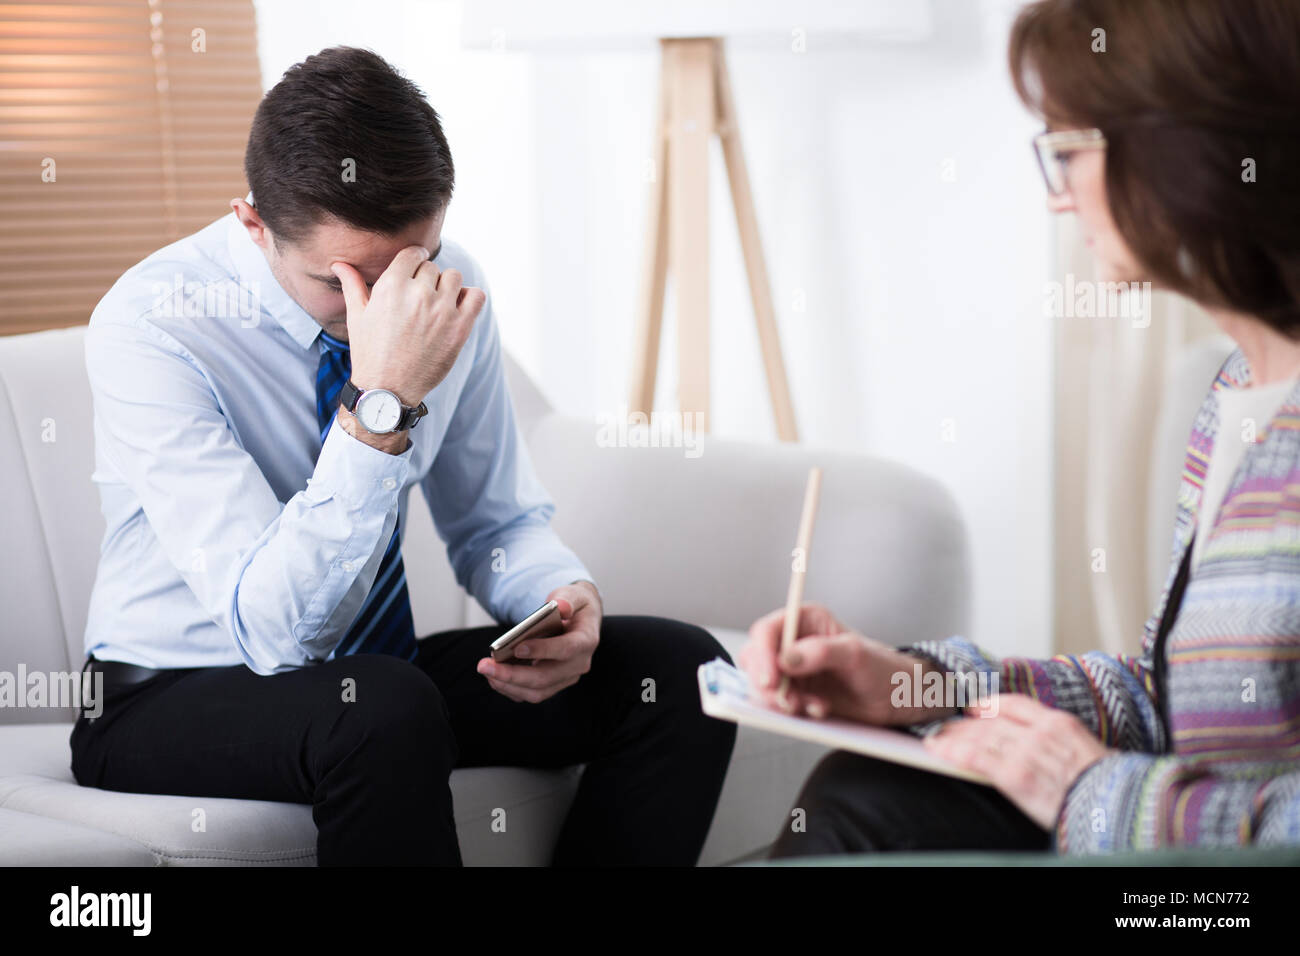 Depressed man with problems looking at his phone while sitting in a psychotherapist's office Stock Photo